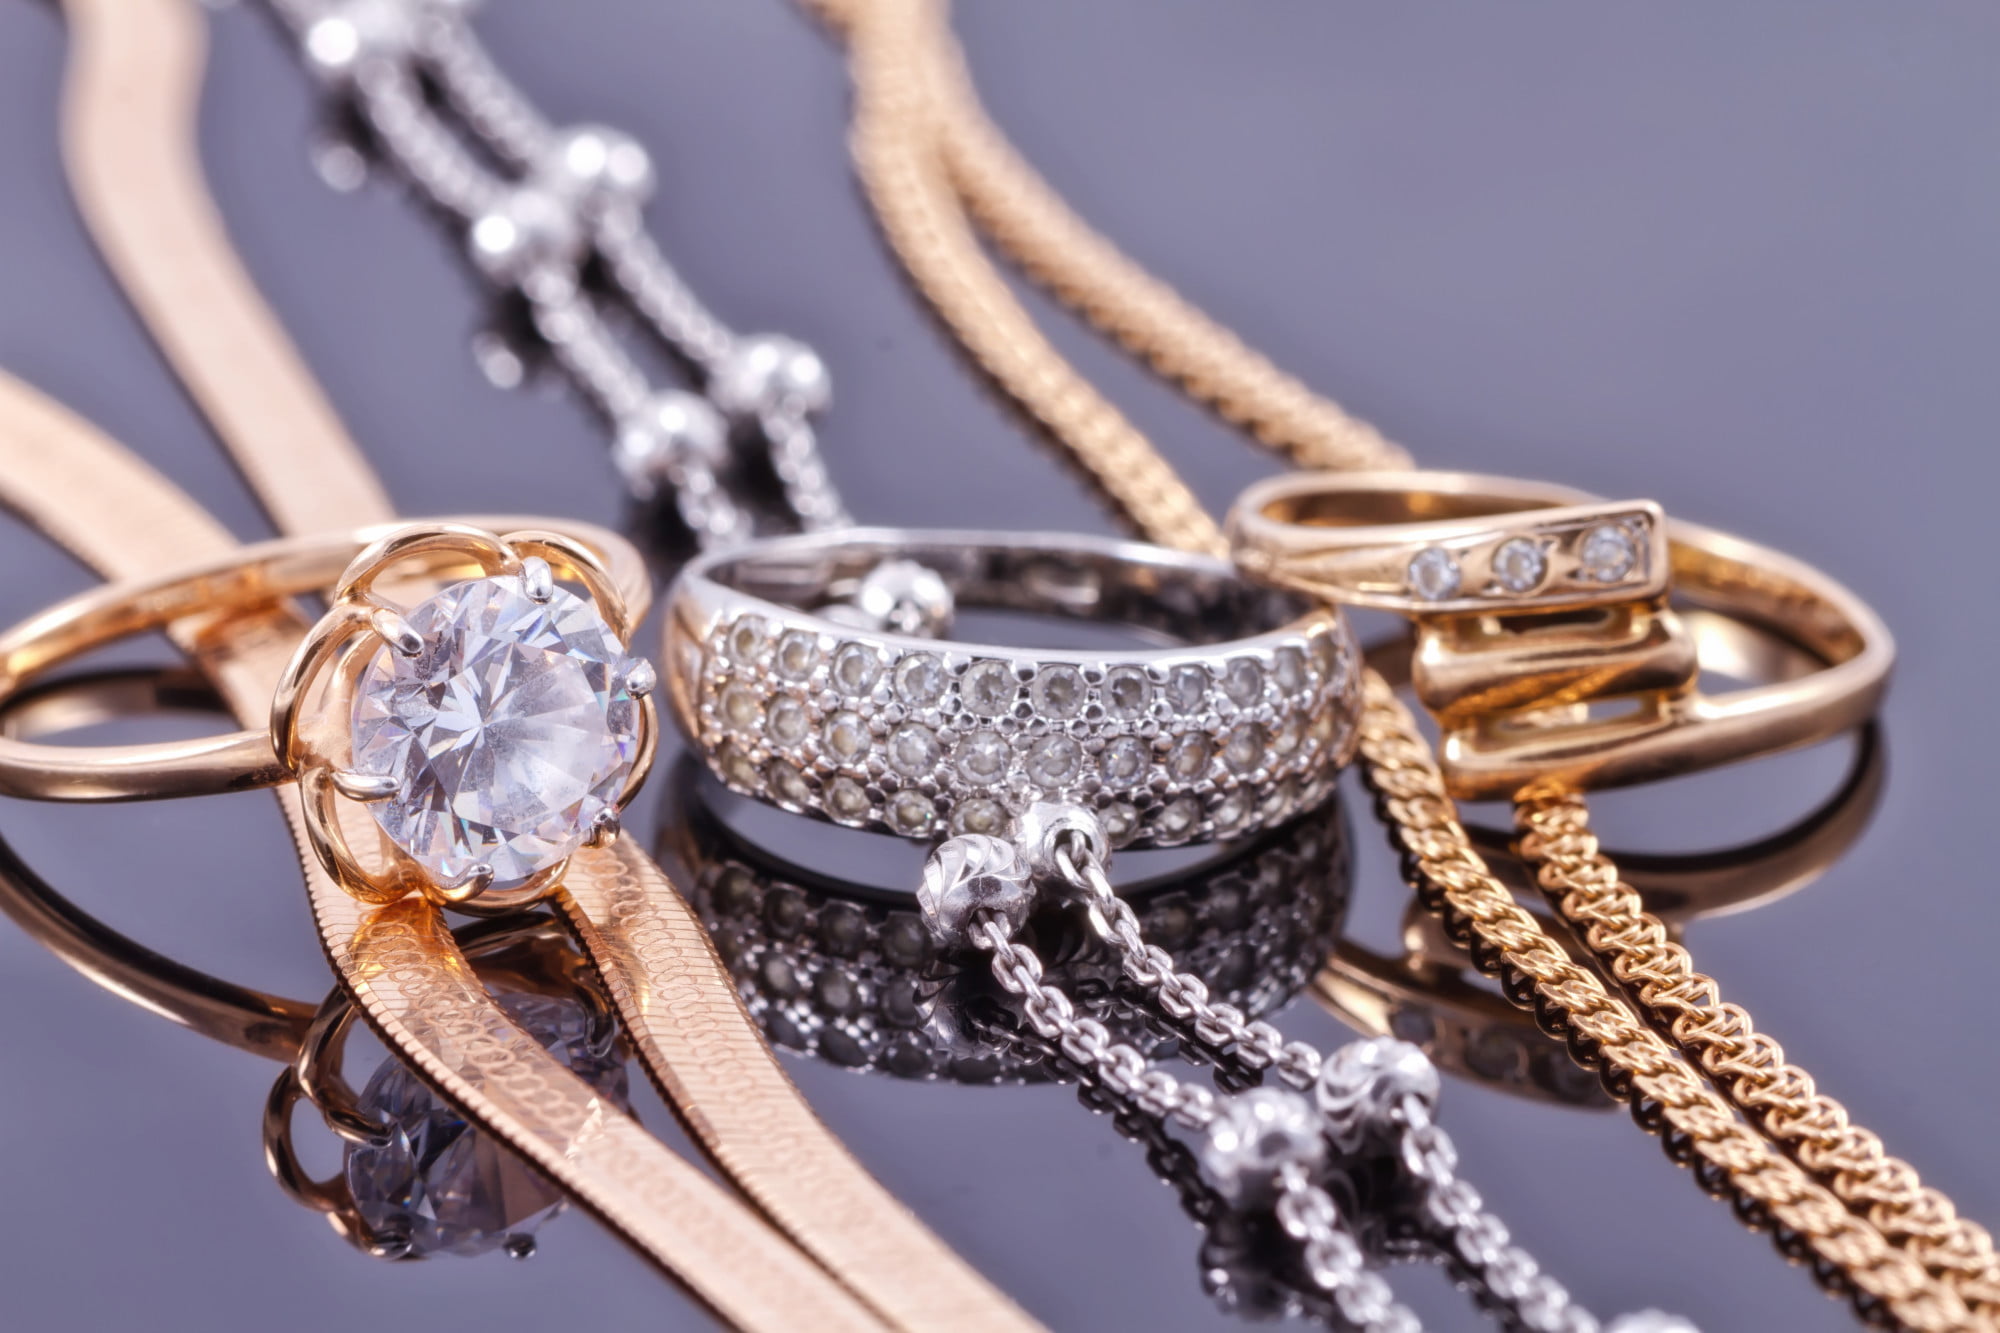 Buying gold and silver can benefit you in a few ways, but there are a few drawbacks. Learn about the pros and cons here.